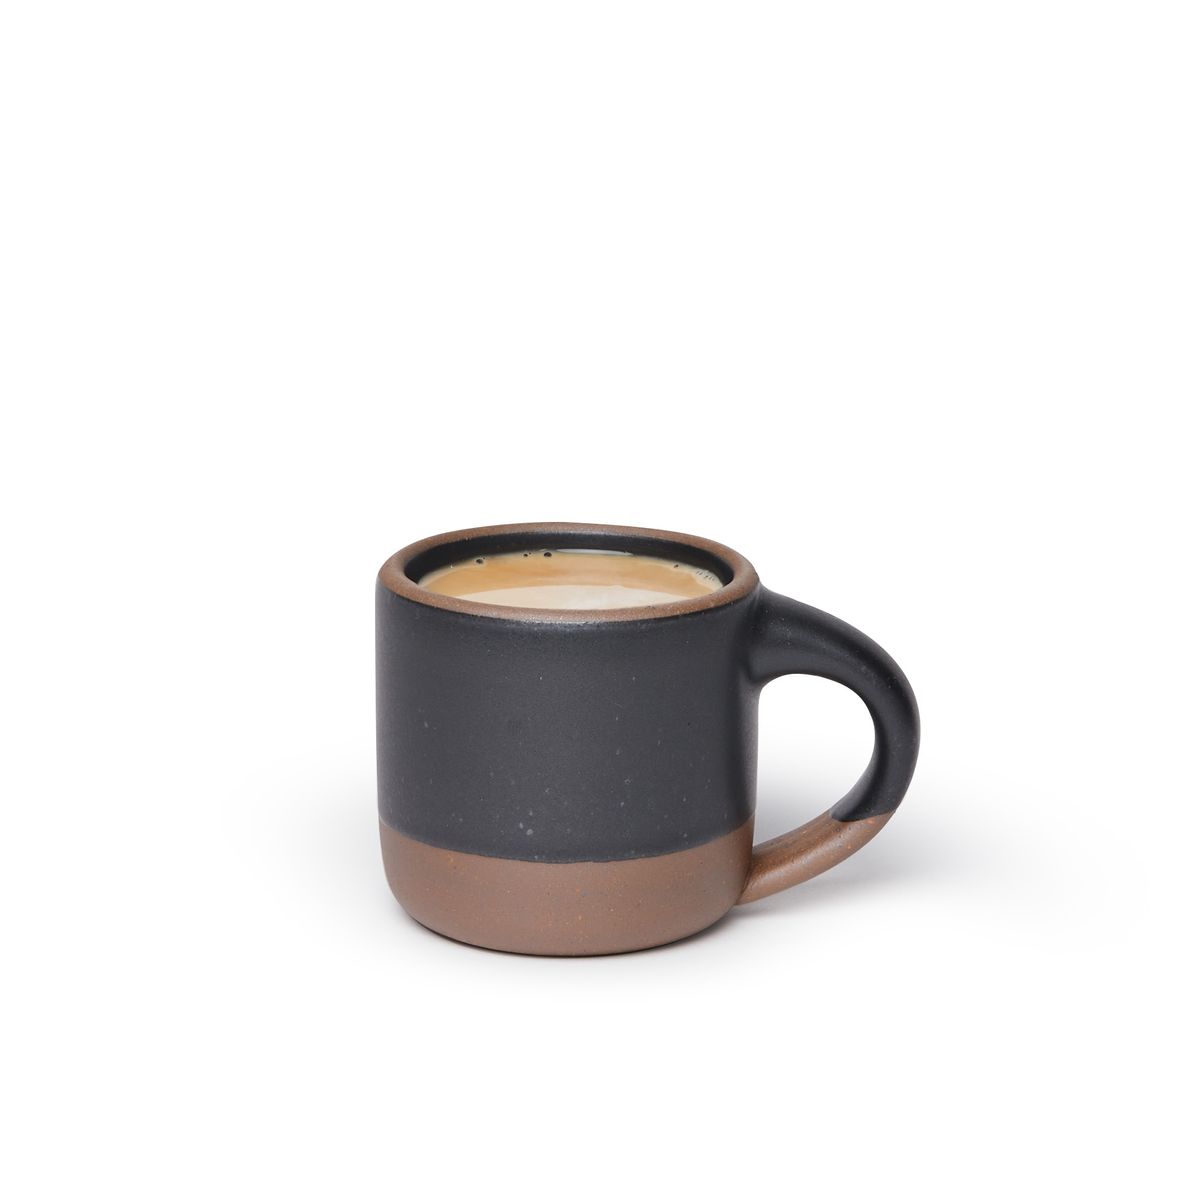 A small sized ceramic mug filled with coffee with handle in a graphite black glaze featuring iron speckles and unglazed rim and bottom base.